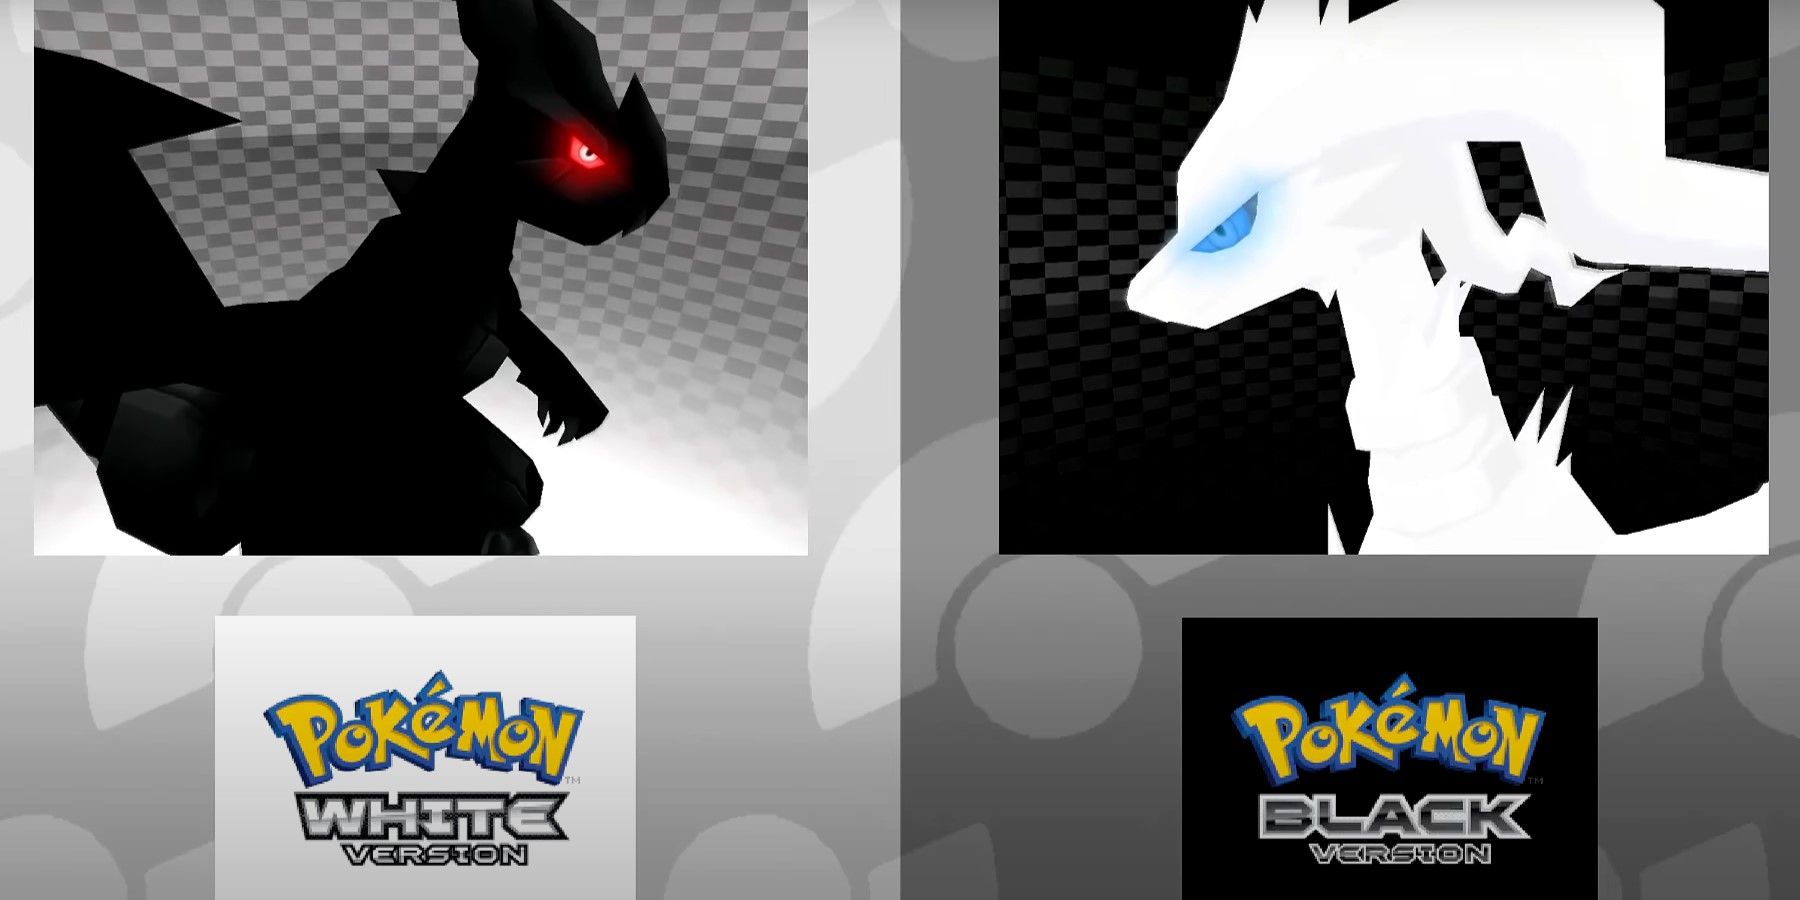 The Pokemon Black And White character is showing the difference between both games.